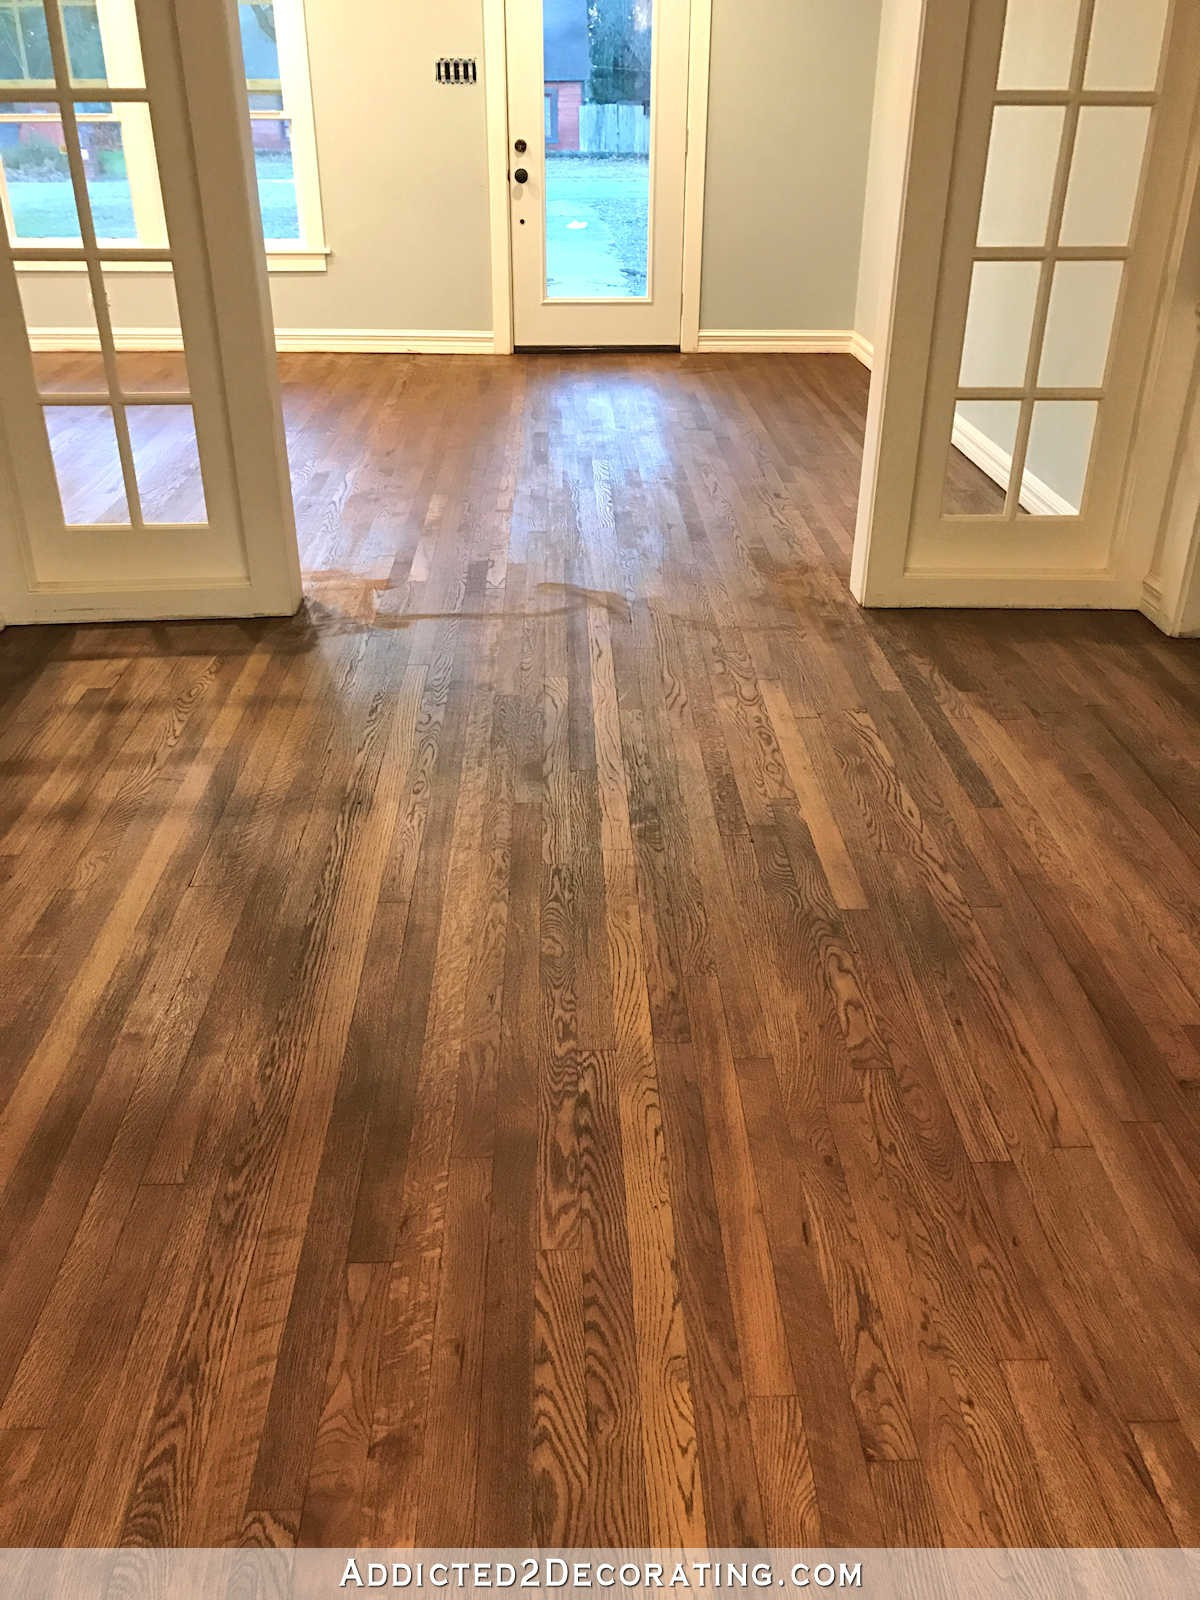 how to refinish hardwood floors diy of 14 luxury diy refinish hardwood floors photograph dizpos com with diy refinish hardwood floors best of adventures in staining my red oak hardwood floors products